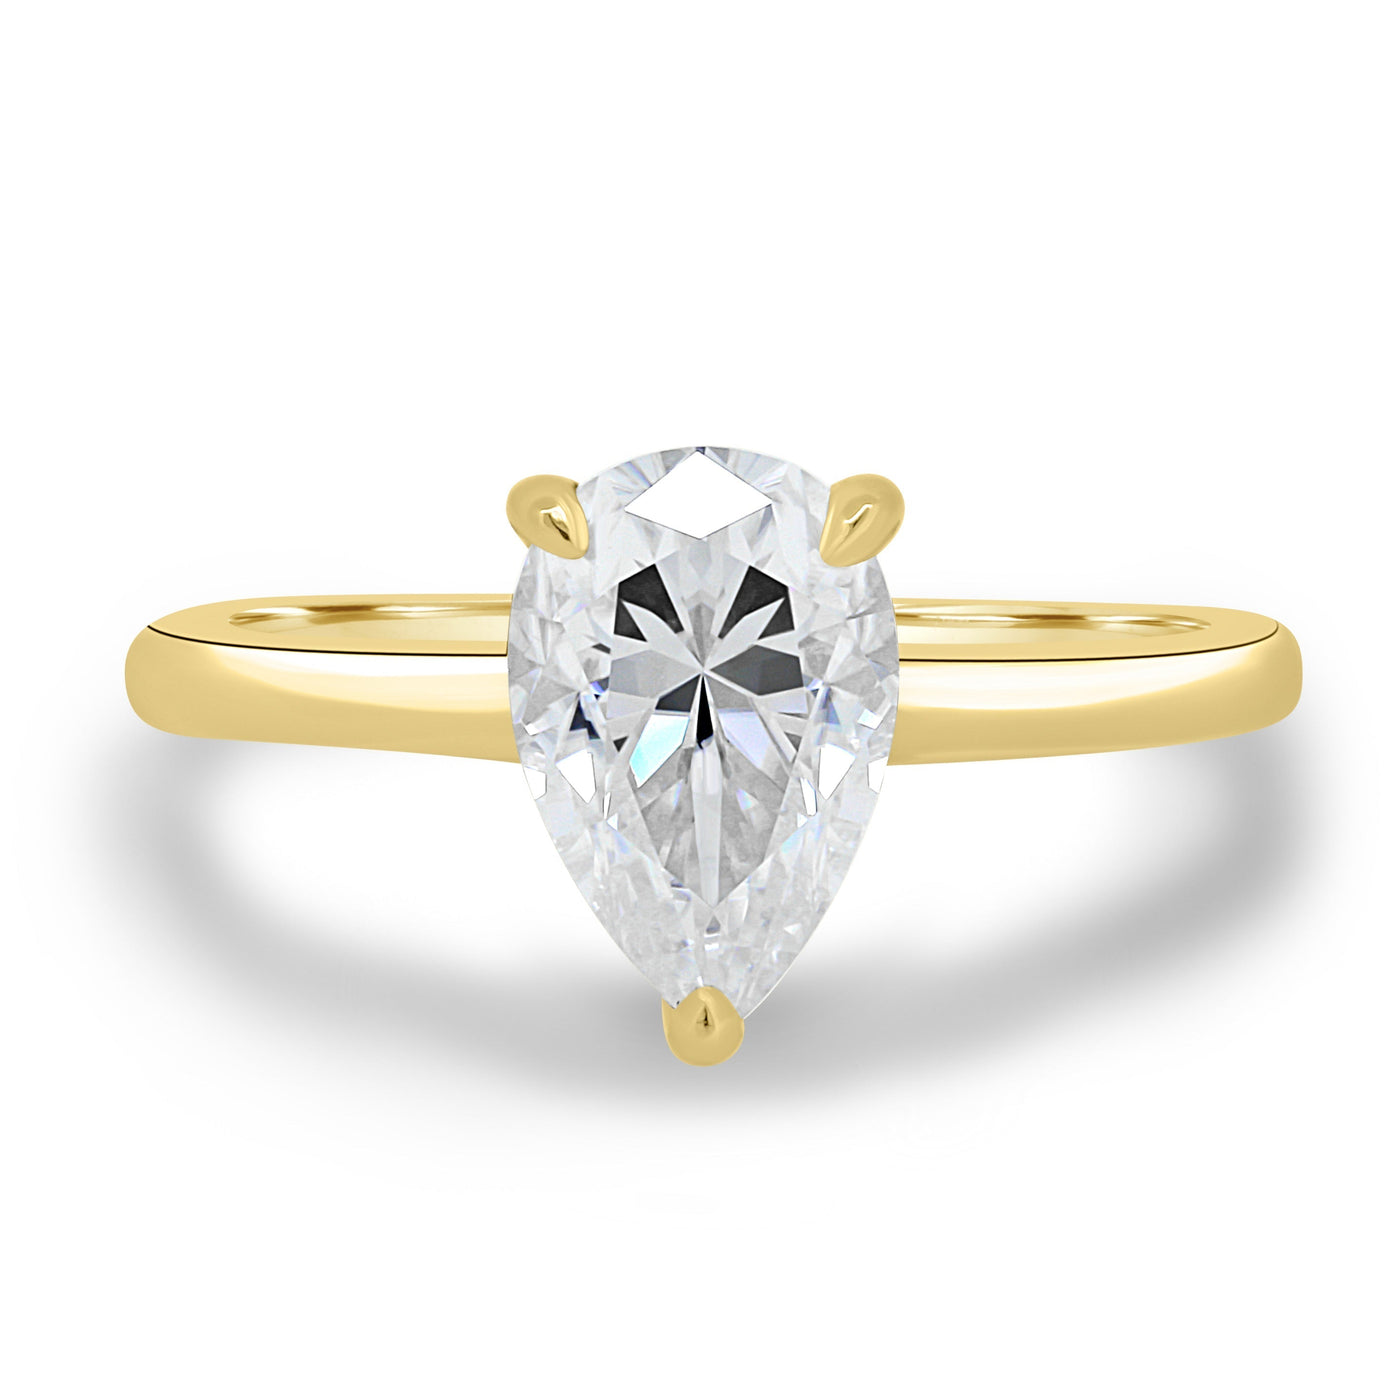 1.80ct Pear Solitaire E/VS1 Lab Grown Diamond Engagement Ring